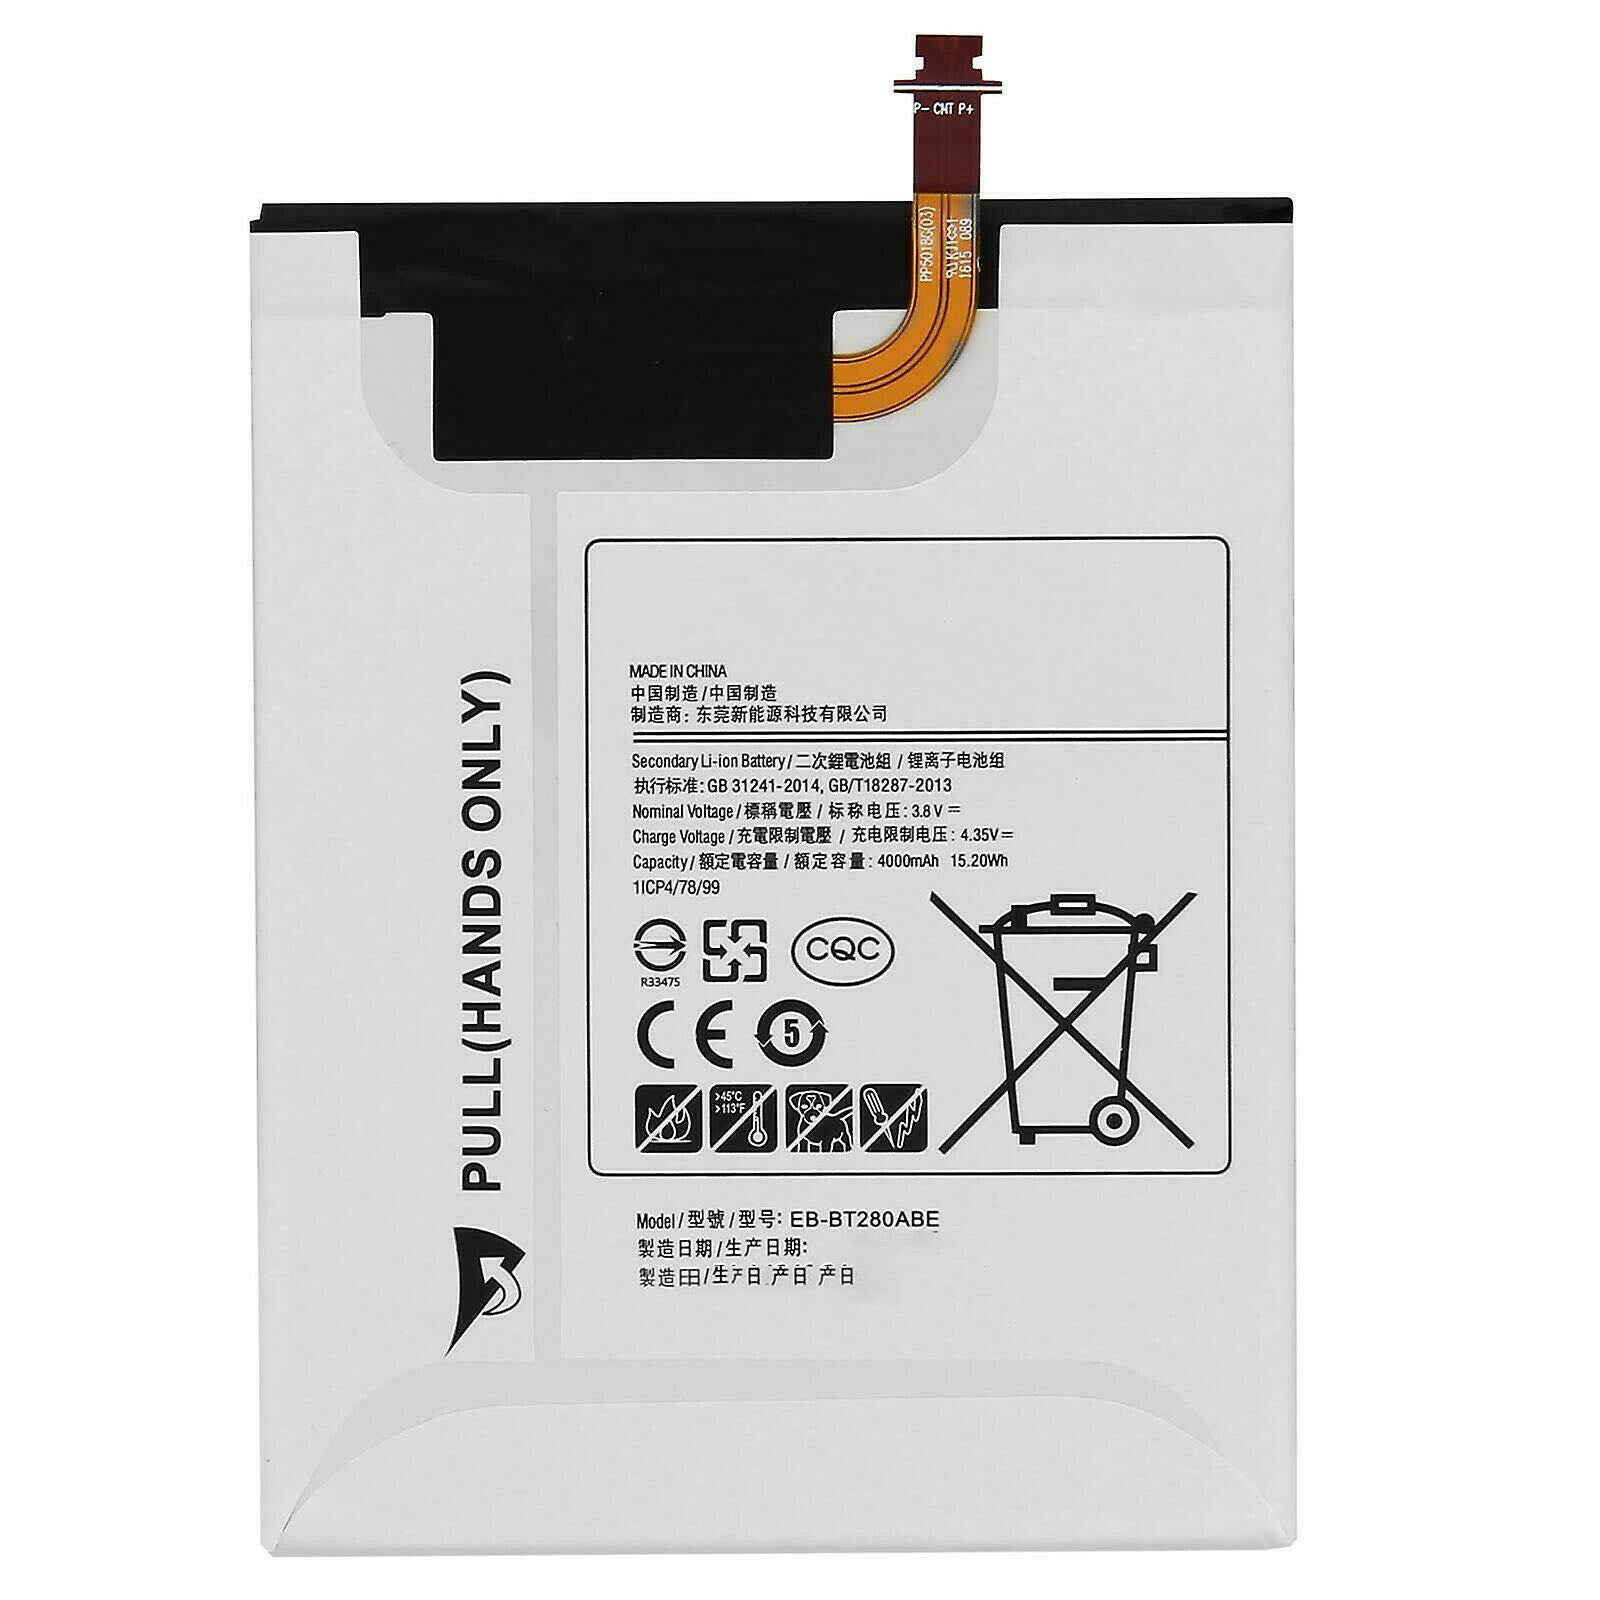 Replacement Battery For Samsung Galaxy Tab A 7.0" - EB-BT280ABE